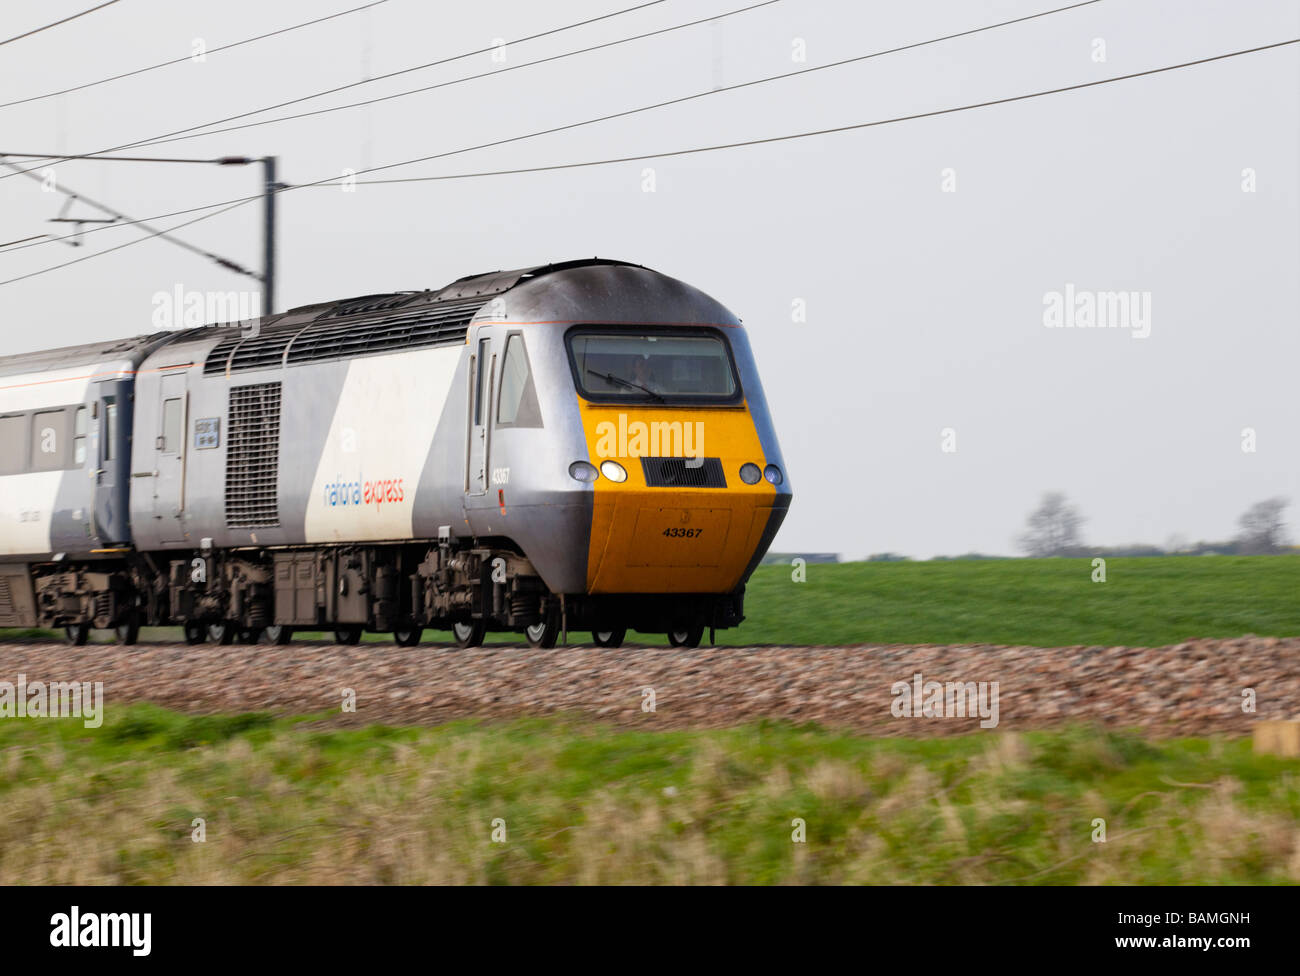 Class 43 Deltic 50 HST,43367 National Express train passing Marston, Grantham, Lincs, England Stock Photo